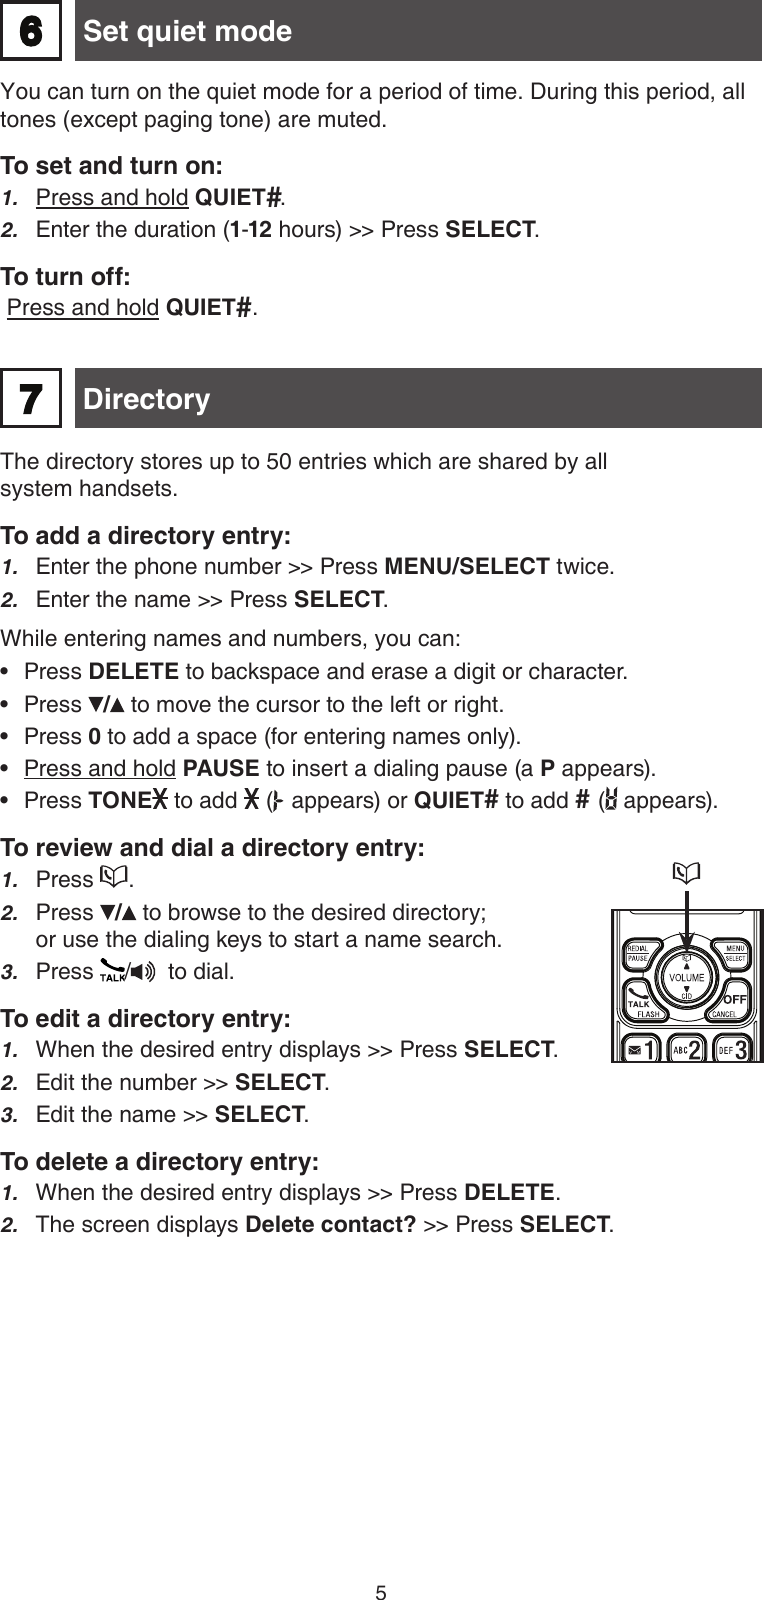 5The directory stores up to 50 entries which are shared by all  system handsets.To add a directory entry:Enter the phone number &gt;&gt; Press MENU/SELECT twice.Enter the name &gt;&gt; Press SELECT.While entering names and numbers, you can:Press DELETE to backspace and erase a digit or character. Press / to move the cursor to the left or right. Press 0 to add a space (for entering names only).Press and hold PAUSE to insert a dialing pause (a P appears).Press TONE  to add   (  appears) or QUIET# to add # (  appears).To review and dial a directory entry:Press  .Press / to browse to the desired directory; or use the dialing keys to start a name search. Press  /   to dial.To edit a directory entry:When the desired entry displays &gt;&gt; Press SELECT.Edit the number &gt;&gt; SELECT.Edit the name &gt;&gt; SELECT.To delete a directory entry:When the desired entry displays &gt;&gt; Press DELETE.The screen displays Delete contact? &gt;&gt; Press SELECT. 1.2.•••••1.2.3.1.2.3.1.2. Directory7You can turn on the quiet mode for a period of time. During this period, all tones (except paging tone) are muted.To set and turn on:Press and hold QUIET#.Enter the duration (1-12 hours) &gt;&gt; Press SELECT.To turn off: Press and hold QUIET#.1.2. Set quiet mode6